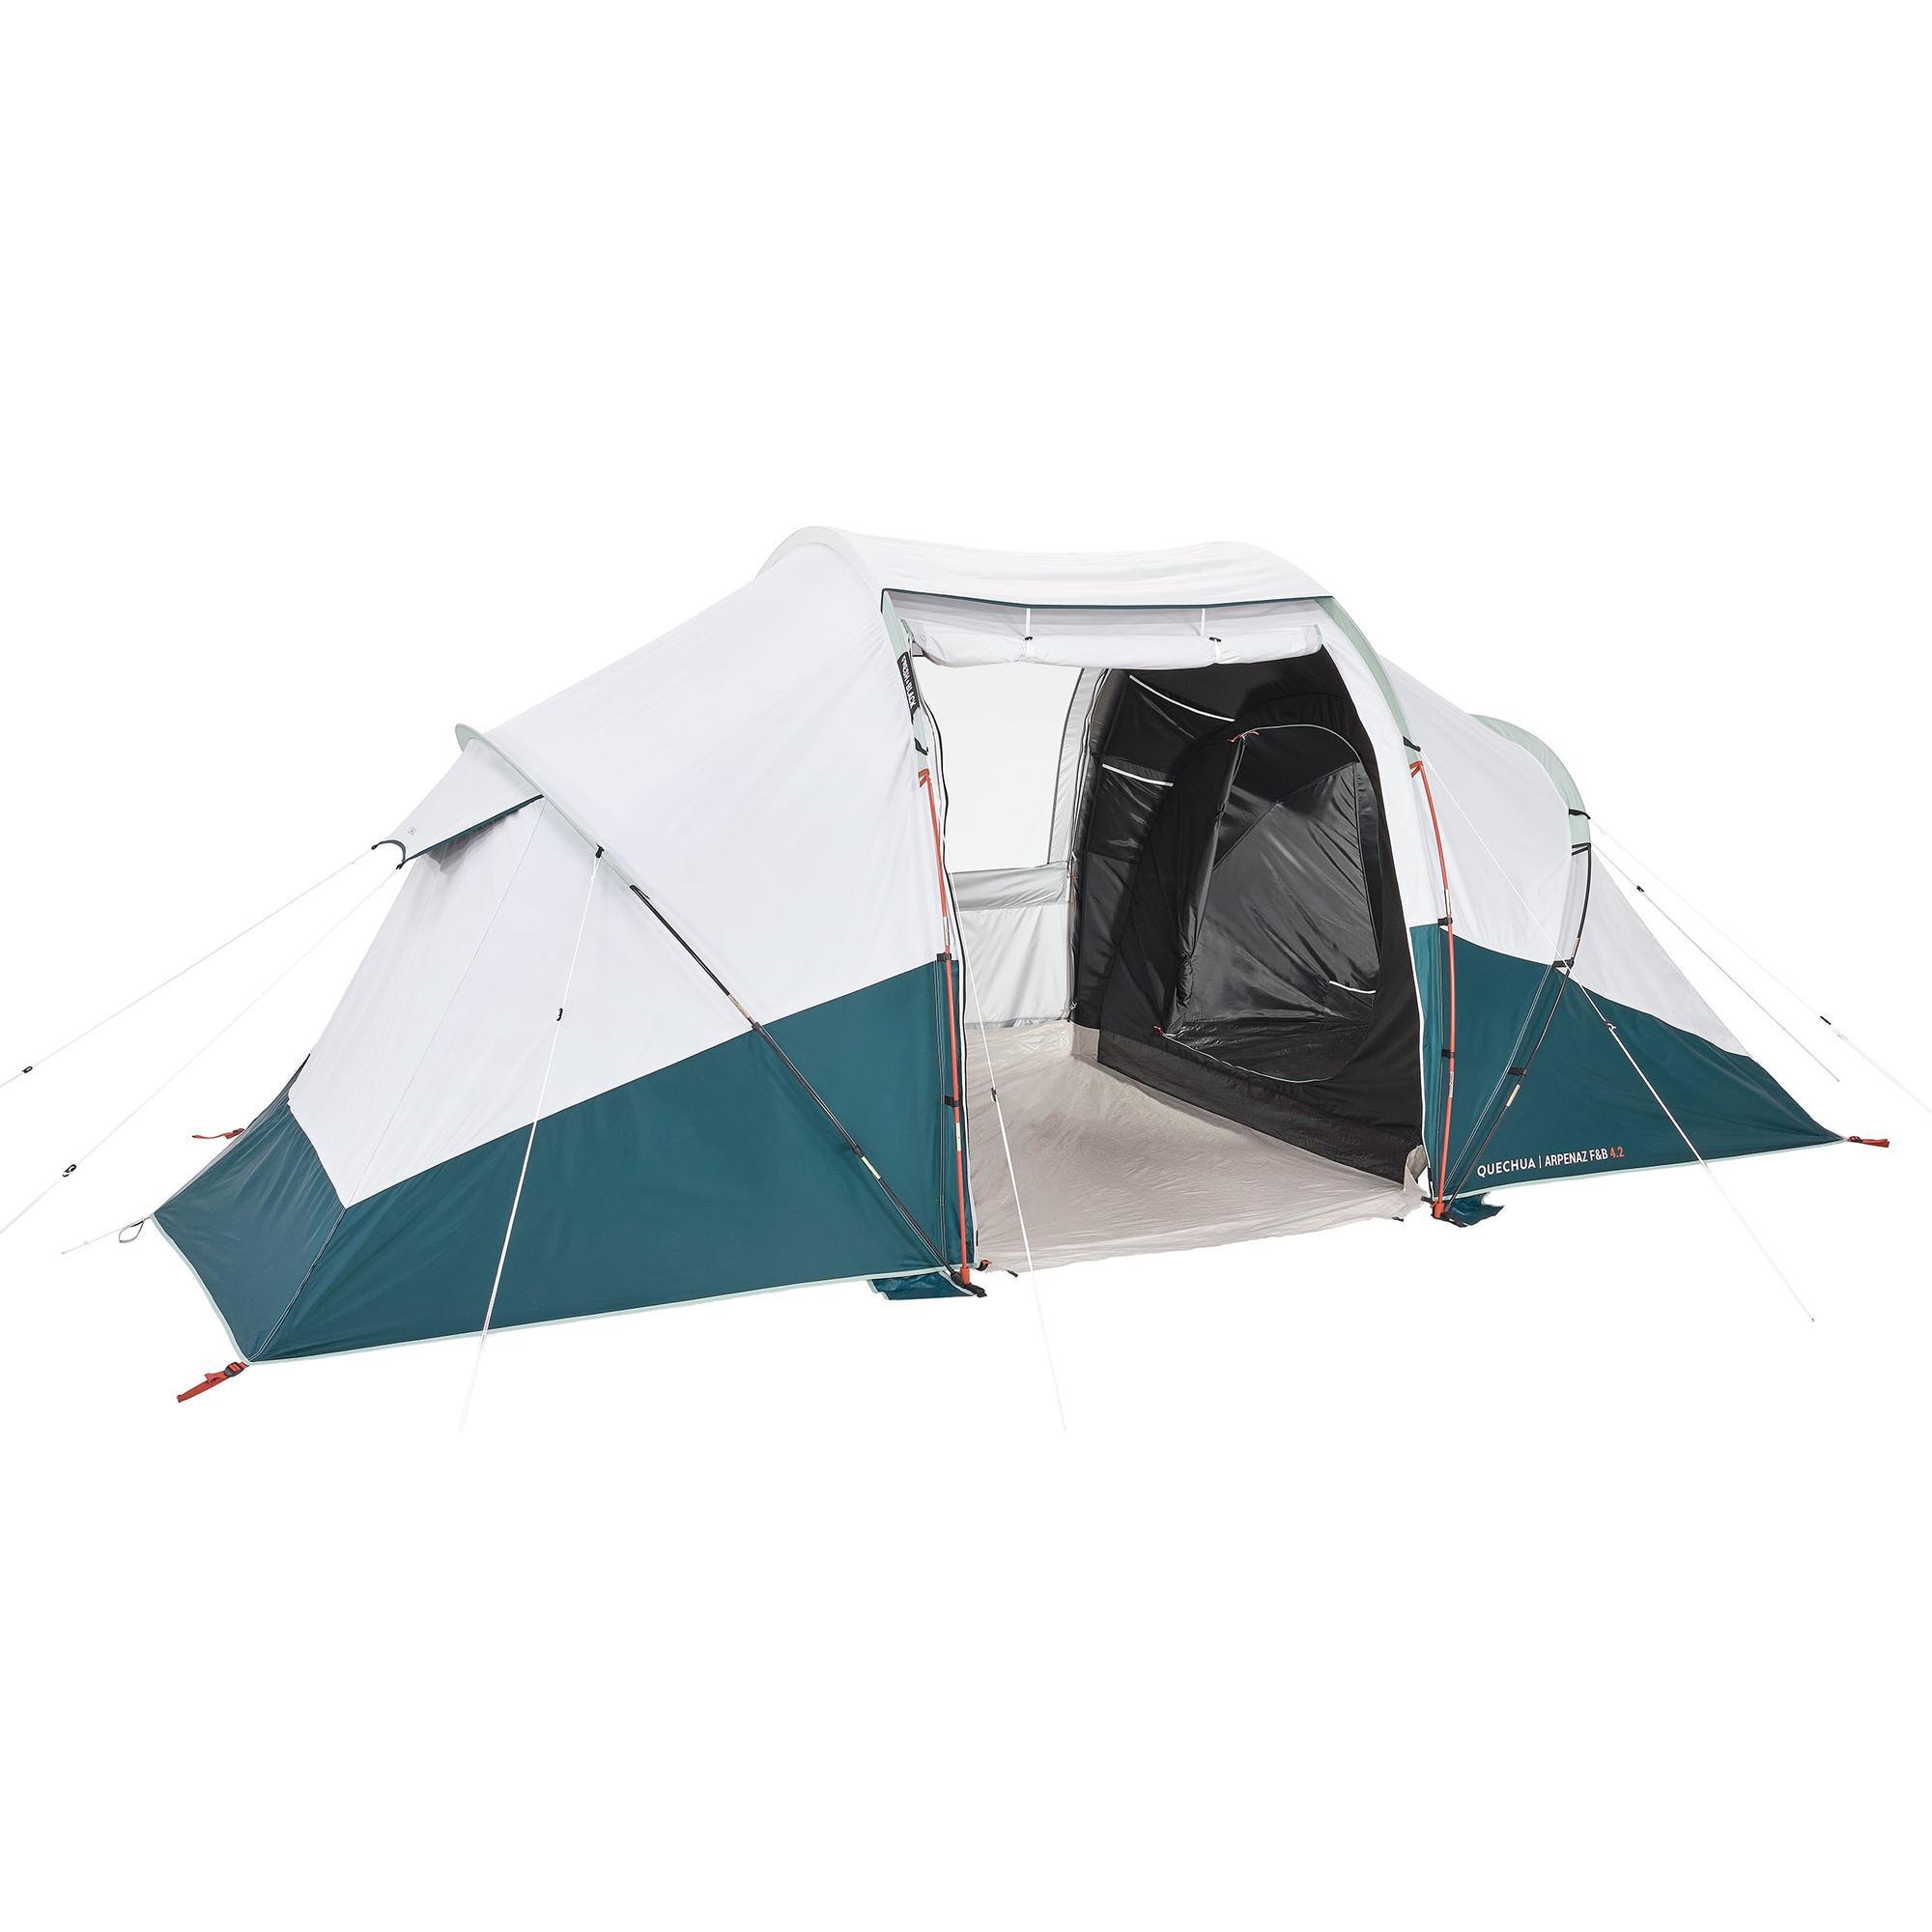 Camping tent with poles - Arpenaz 4.2 F 